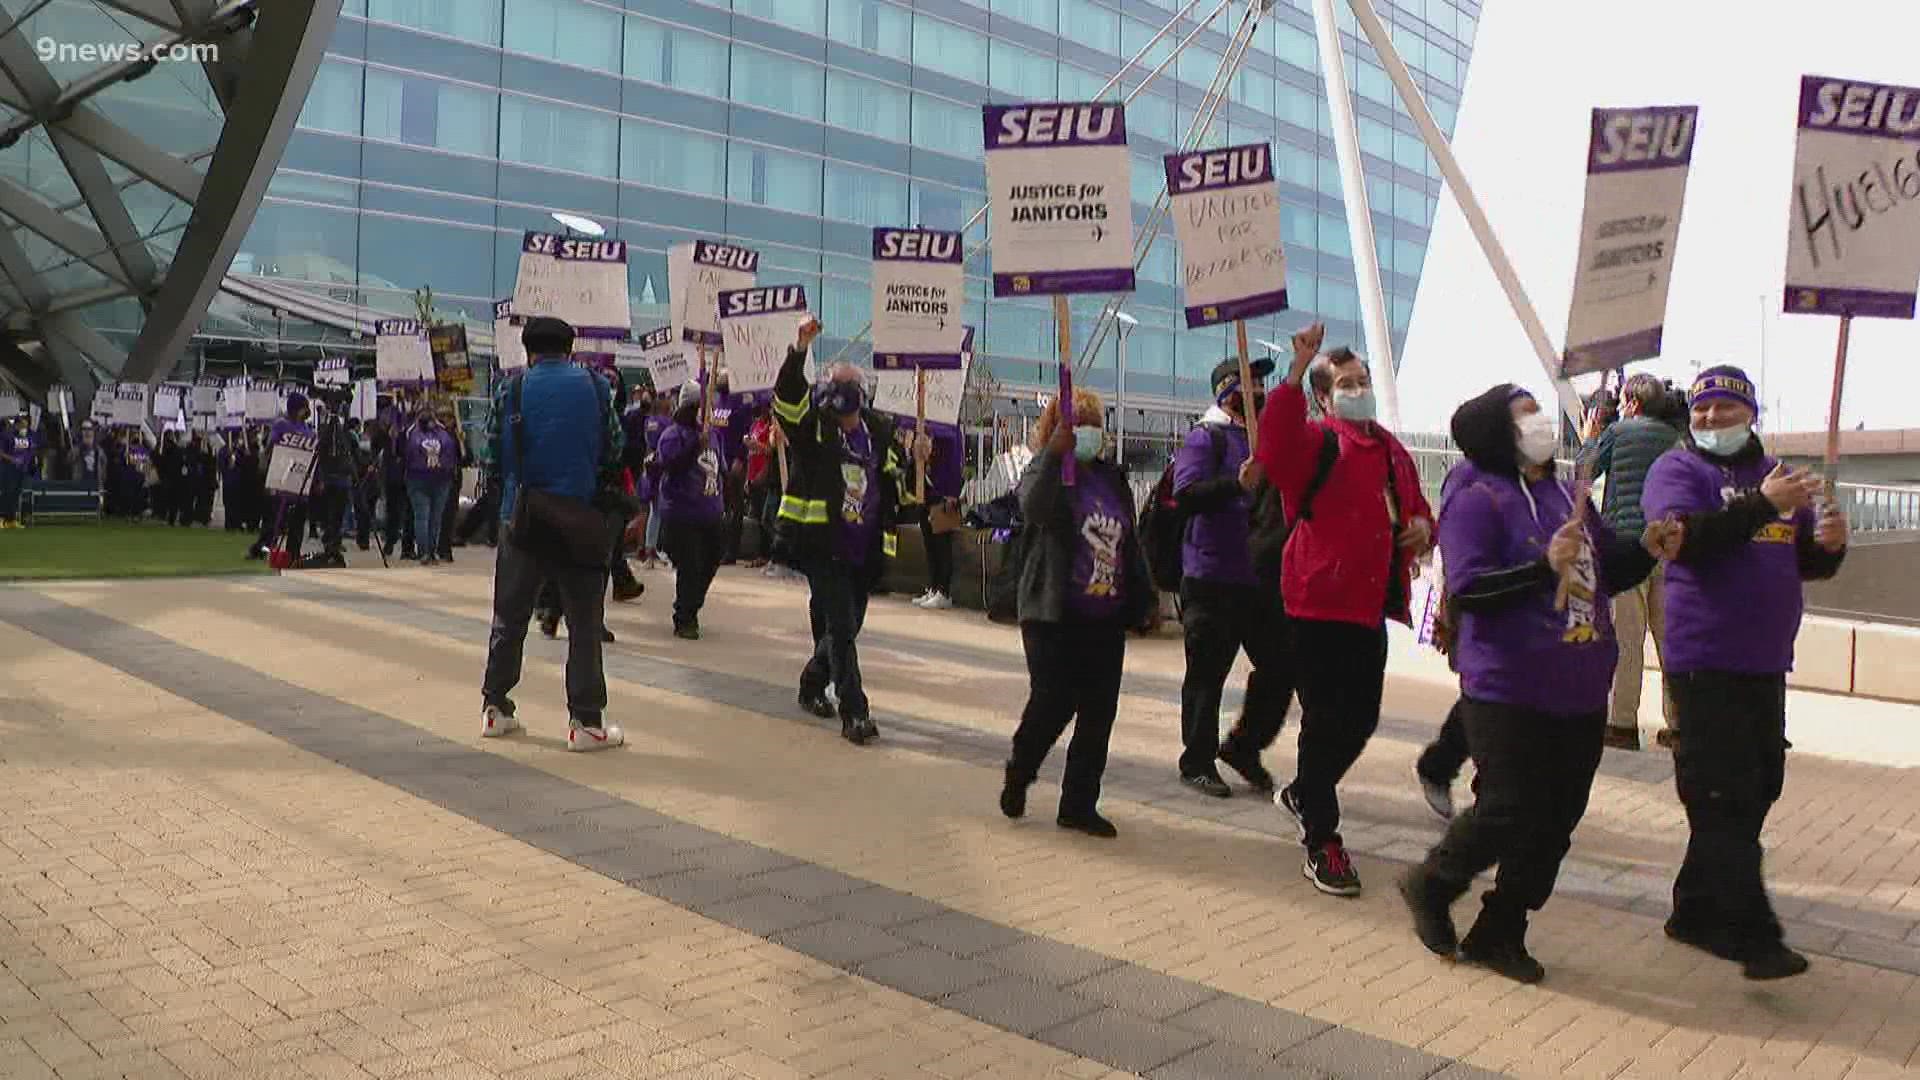 About 350 airport janitors walked off the job Friday, the Service Employees International Union said.